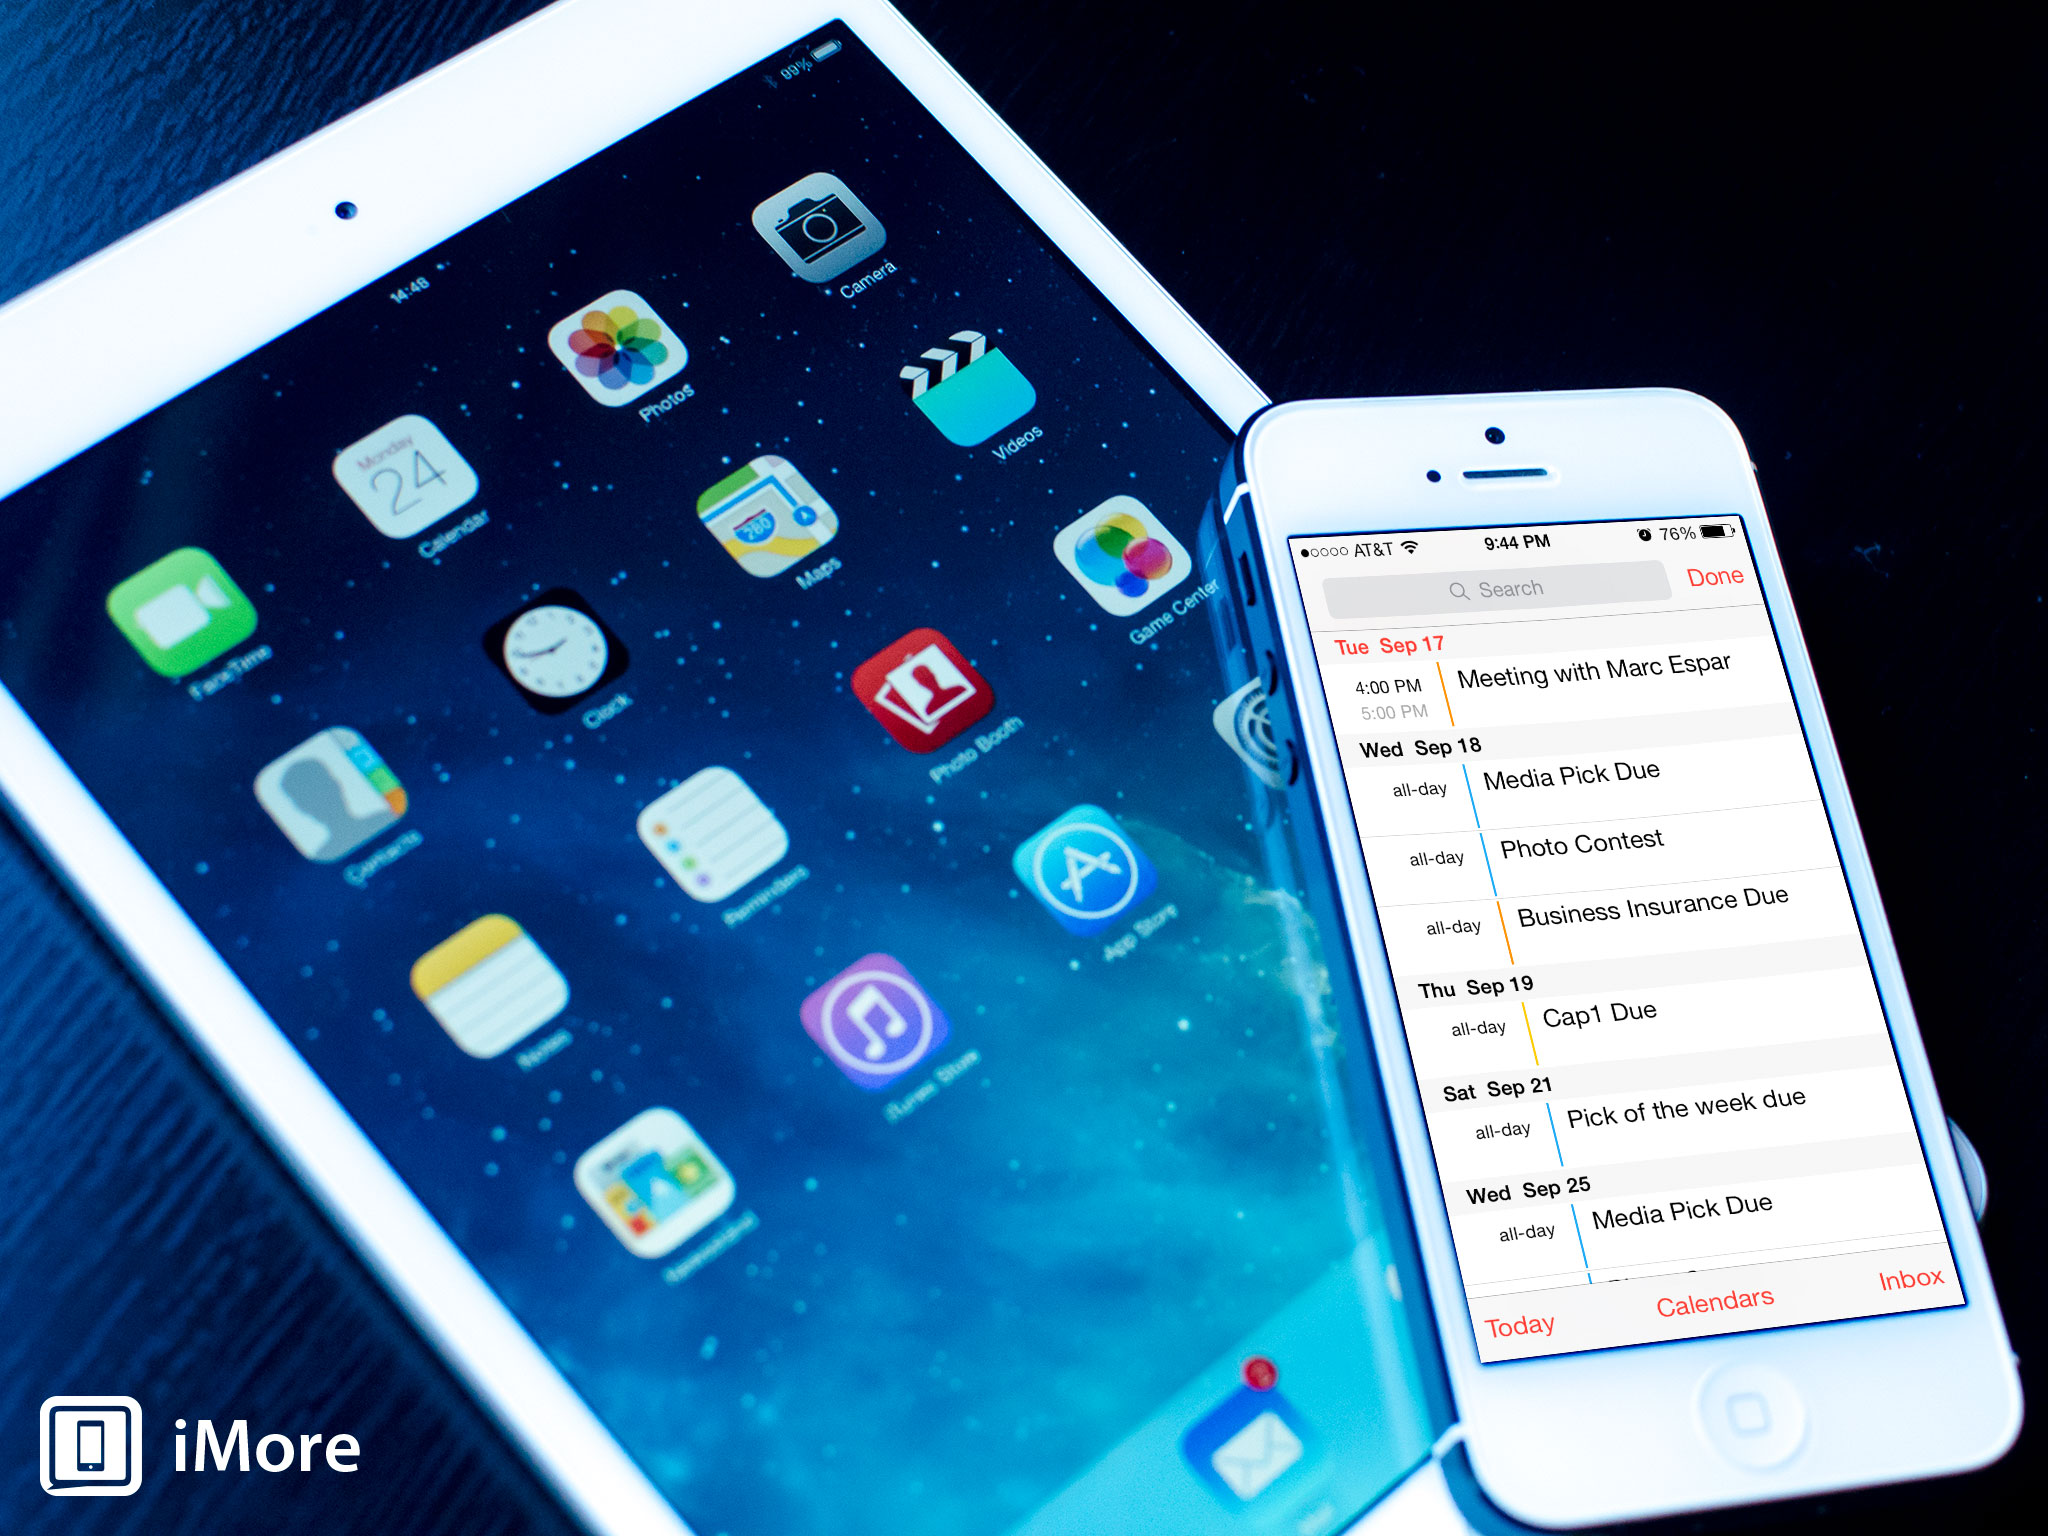 How to access list view in the Calendars app on your iPhone or iPad running iOS 7